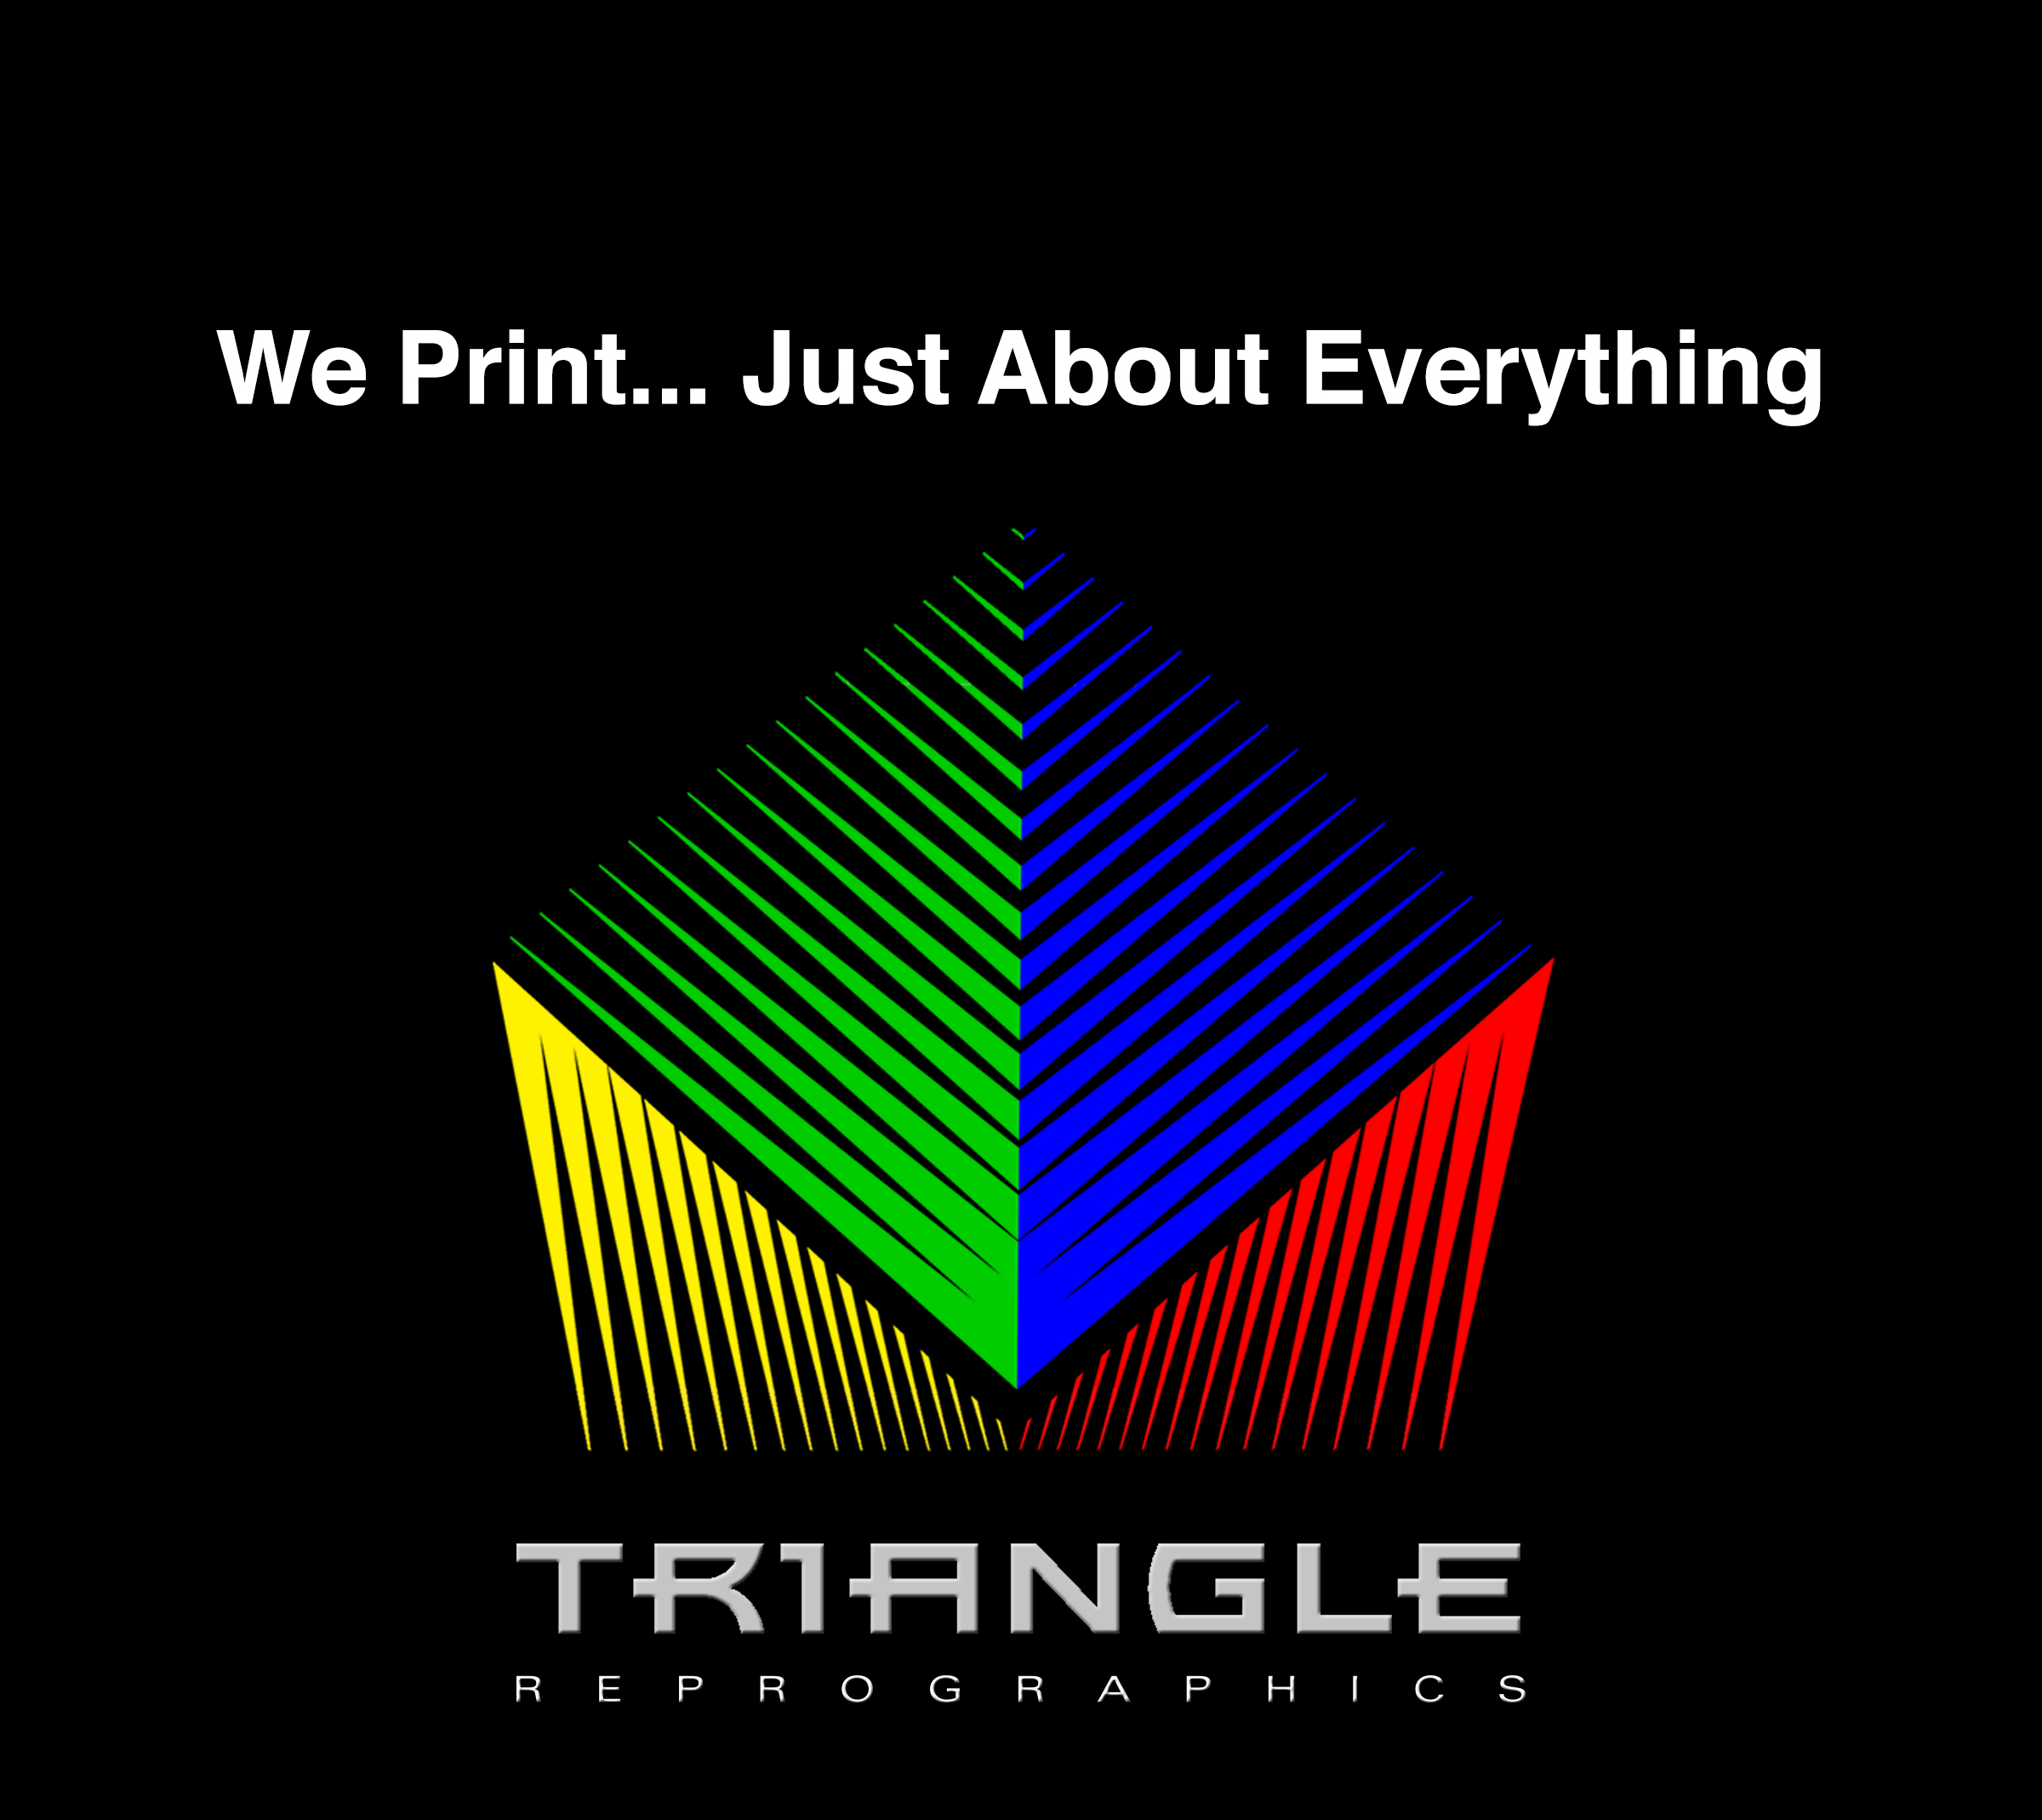 Triangle Reprographics Logo and Tag line - We Print Just About Everything